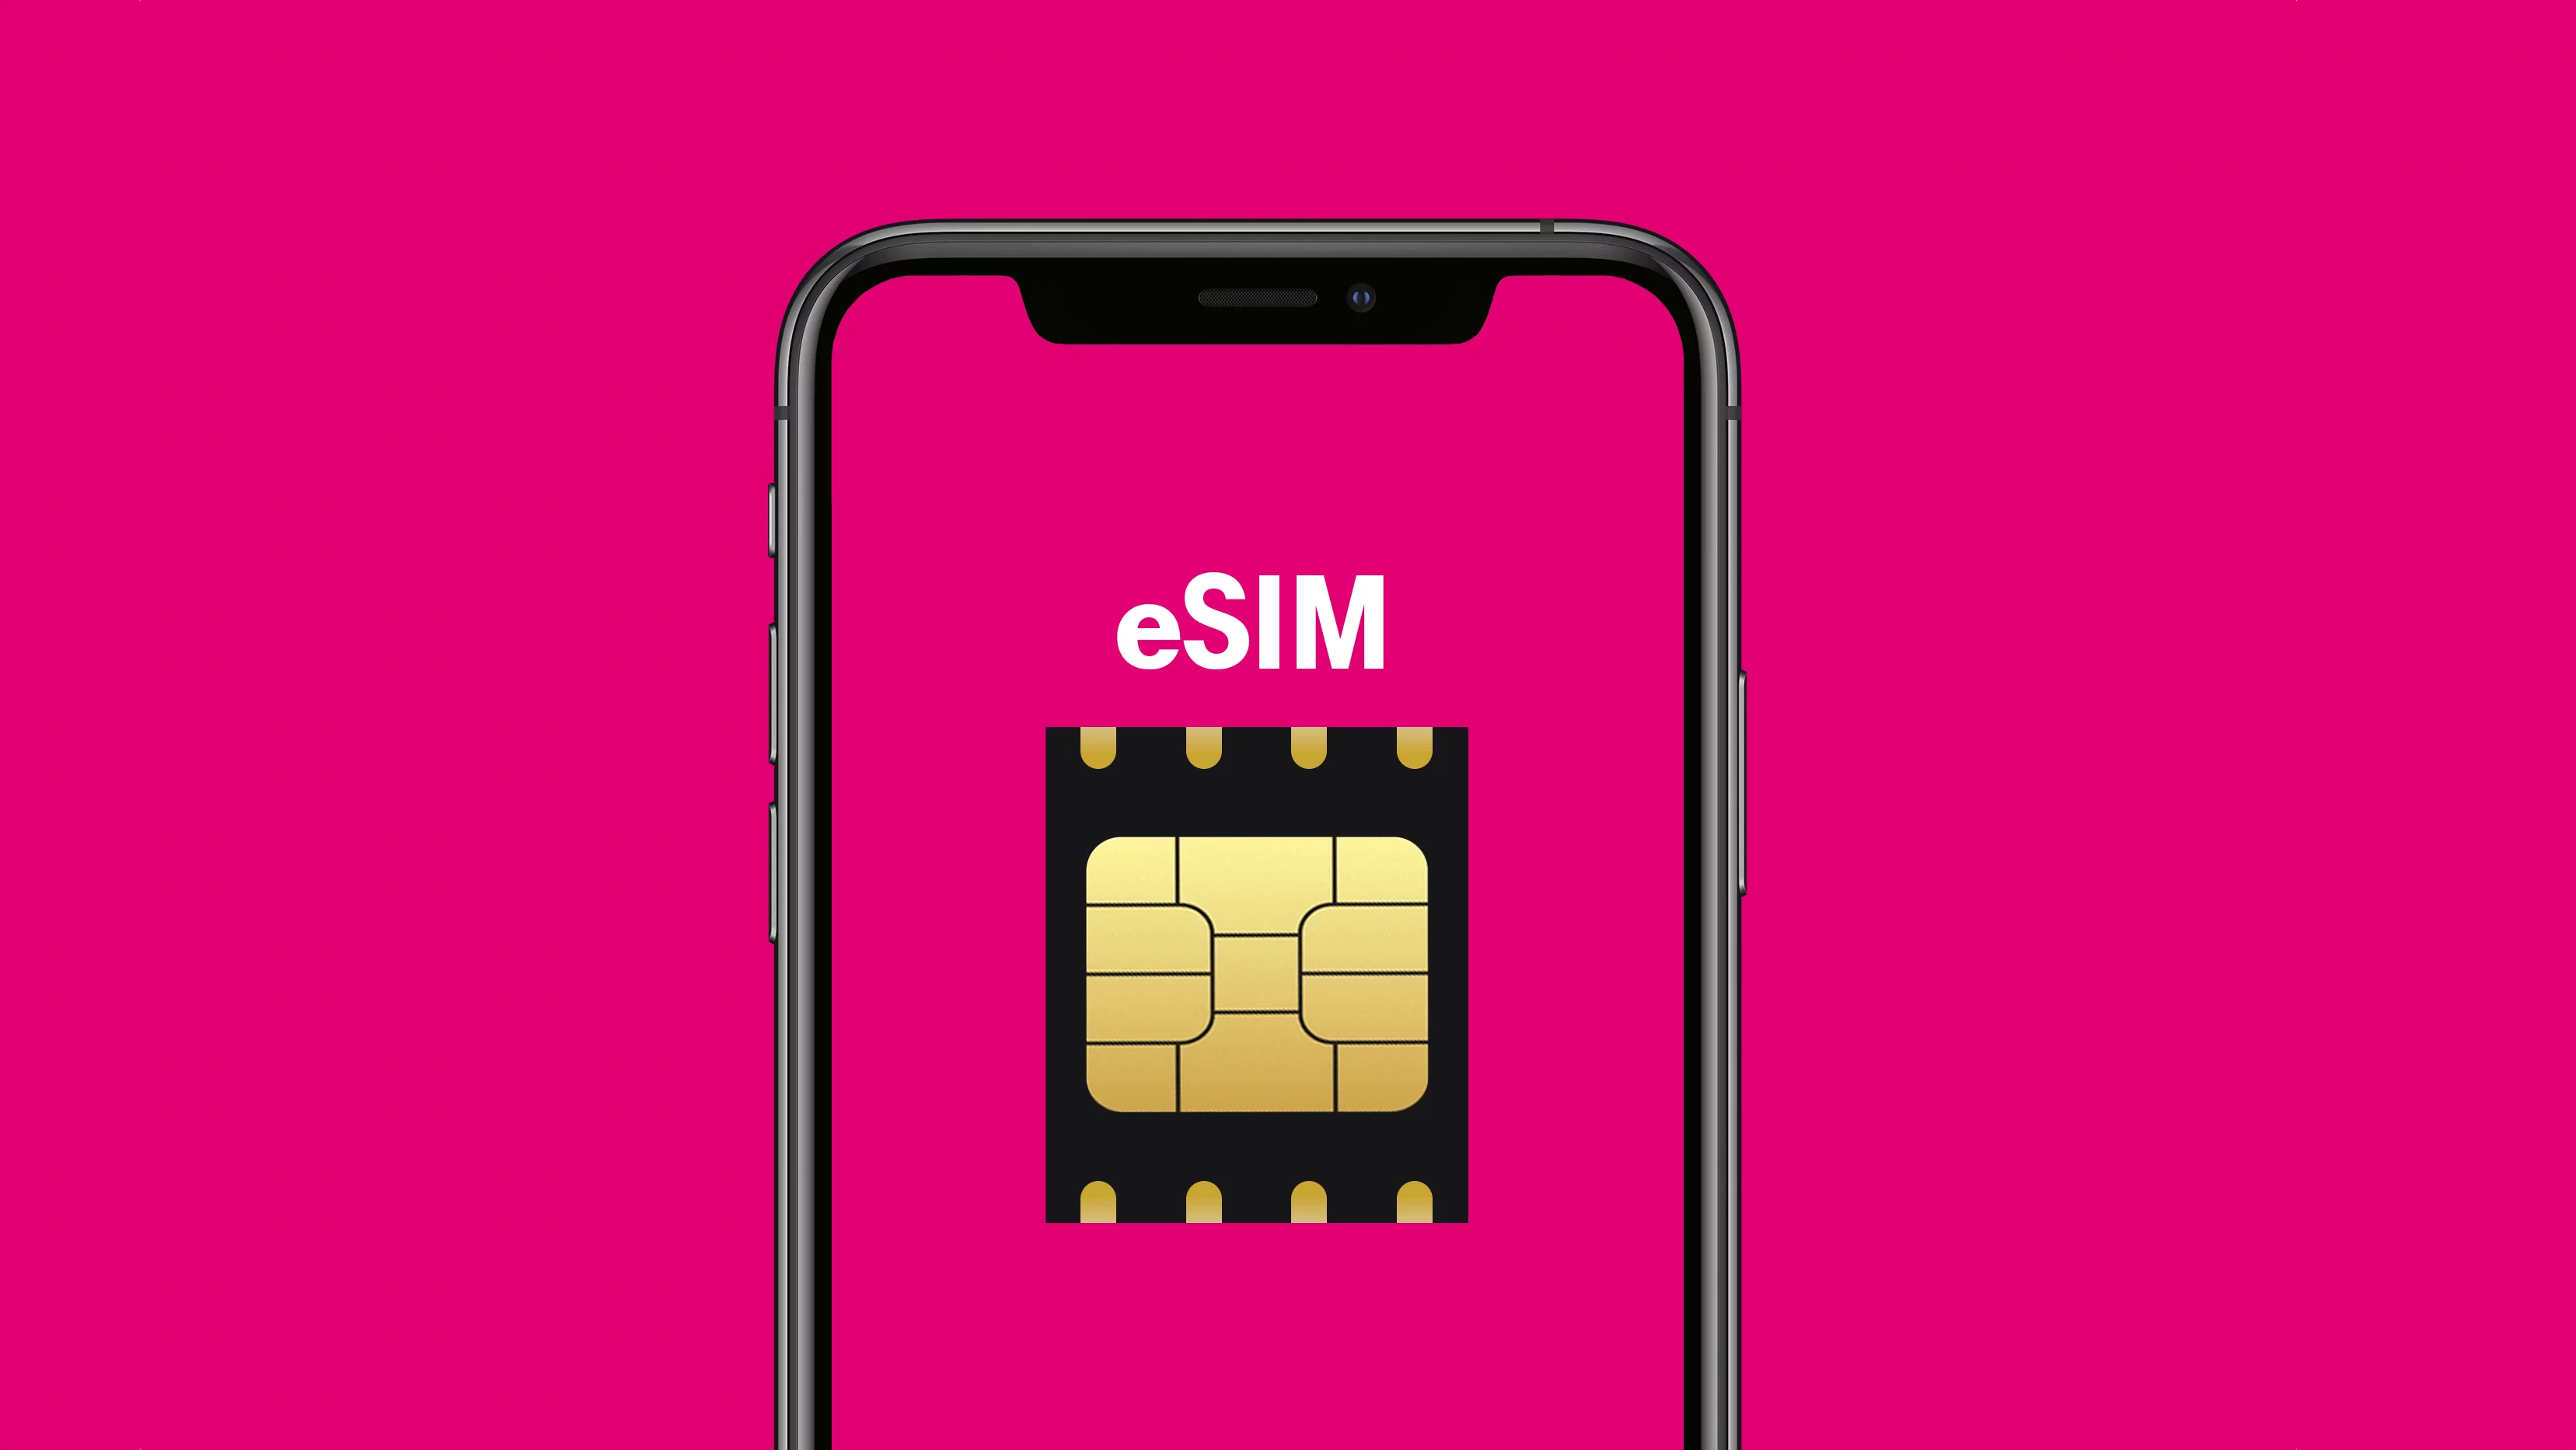 My eSIM Has Not Been Delivered: When Should I Receive It?